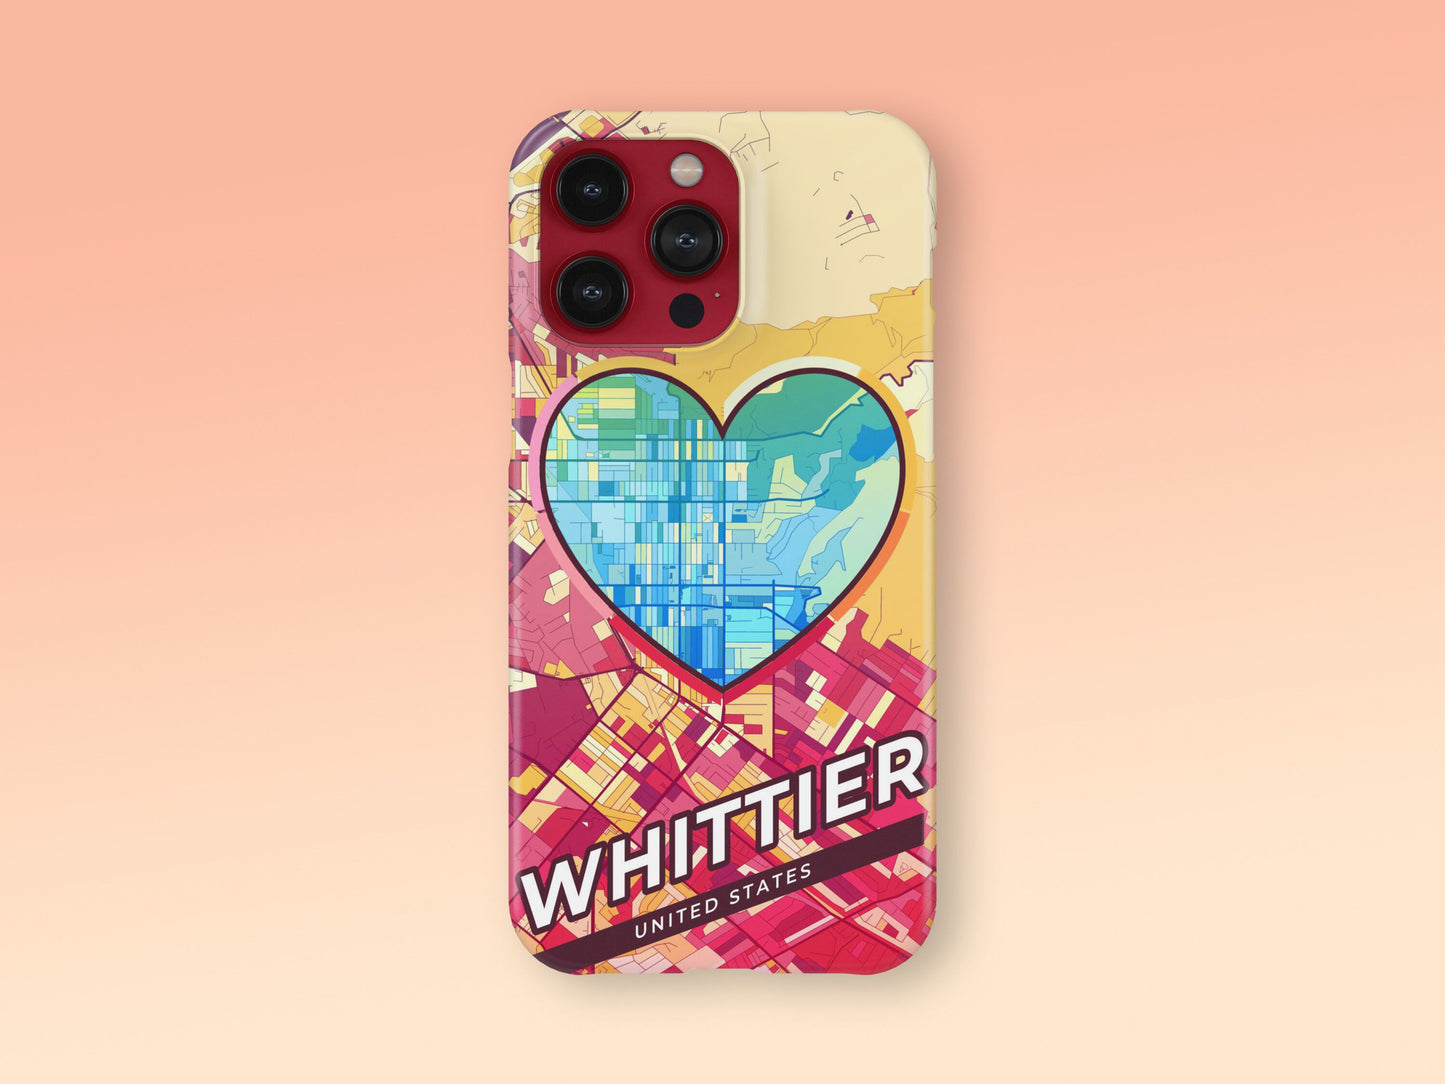 Whittier California slim phone case with colorful icon 2